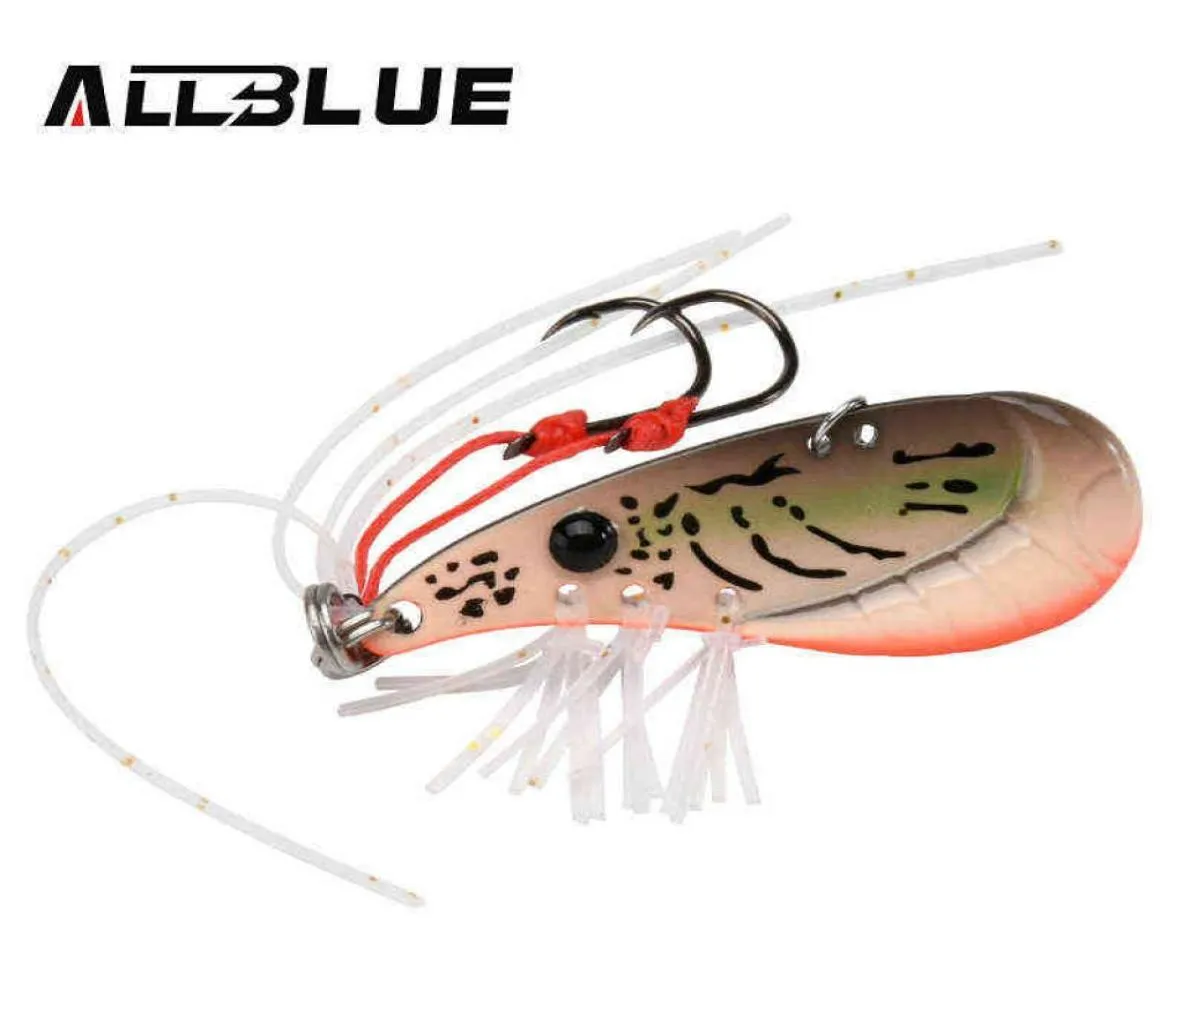 ALLBLUE Crazy Shrimp 7g 14g Metal VIB Sinking Blade Spoon Fishing Lure Bass Artificial Bait With Jig Assist Hook Rubber Skirt 22011097480